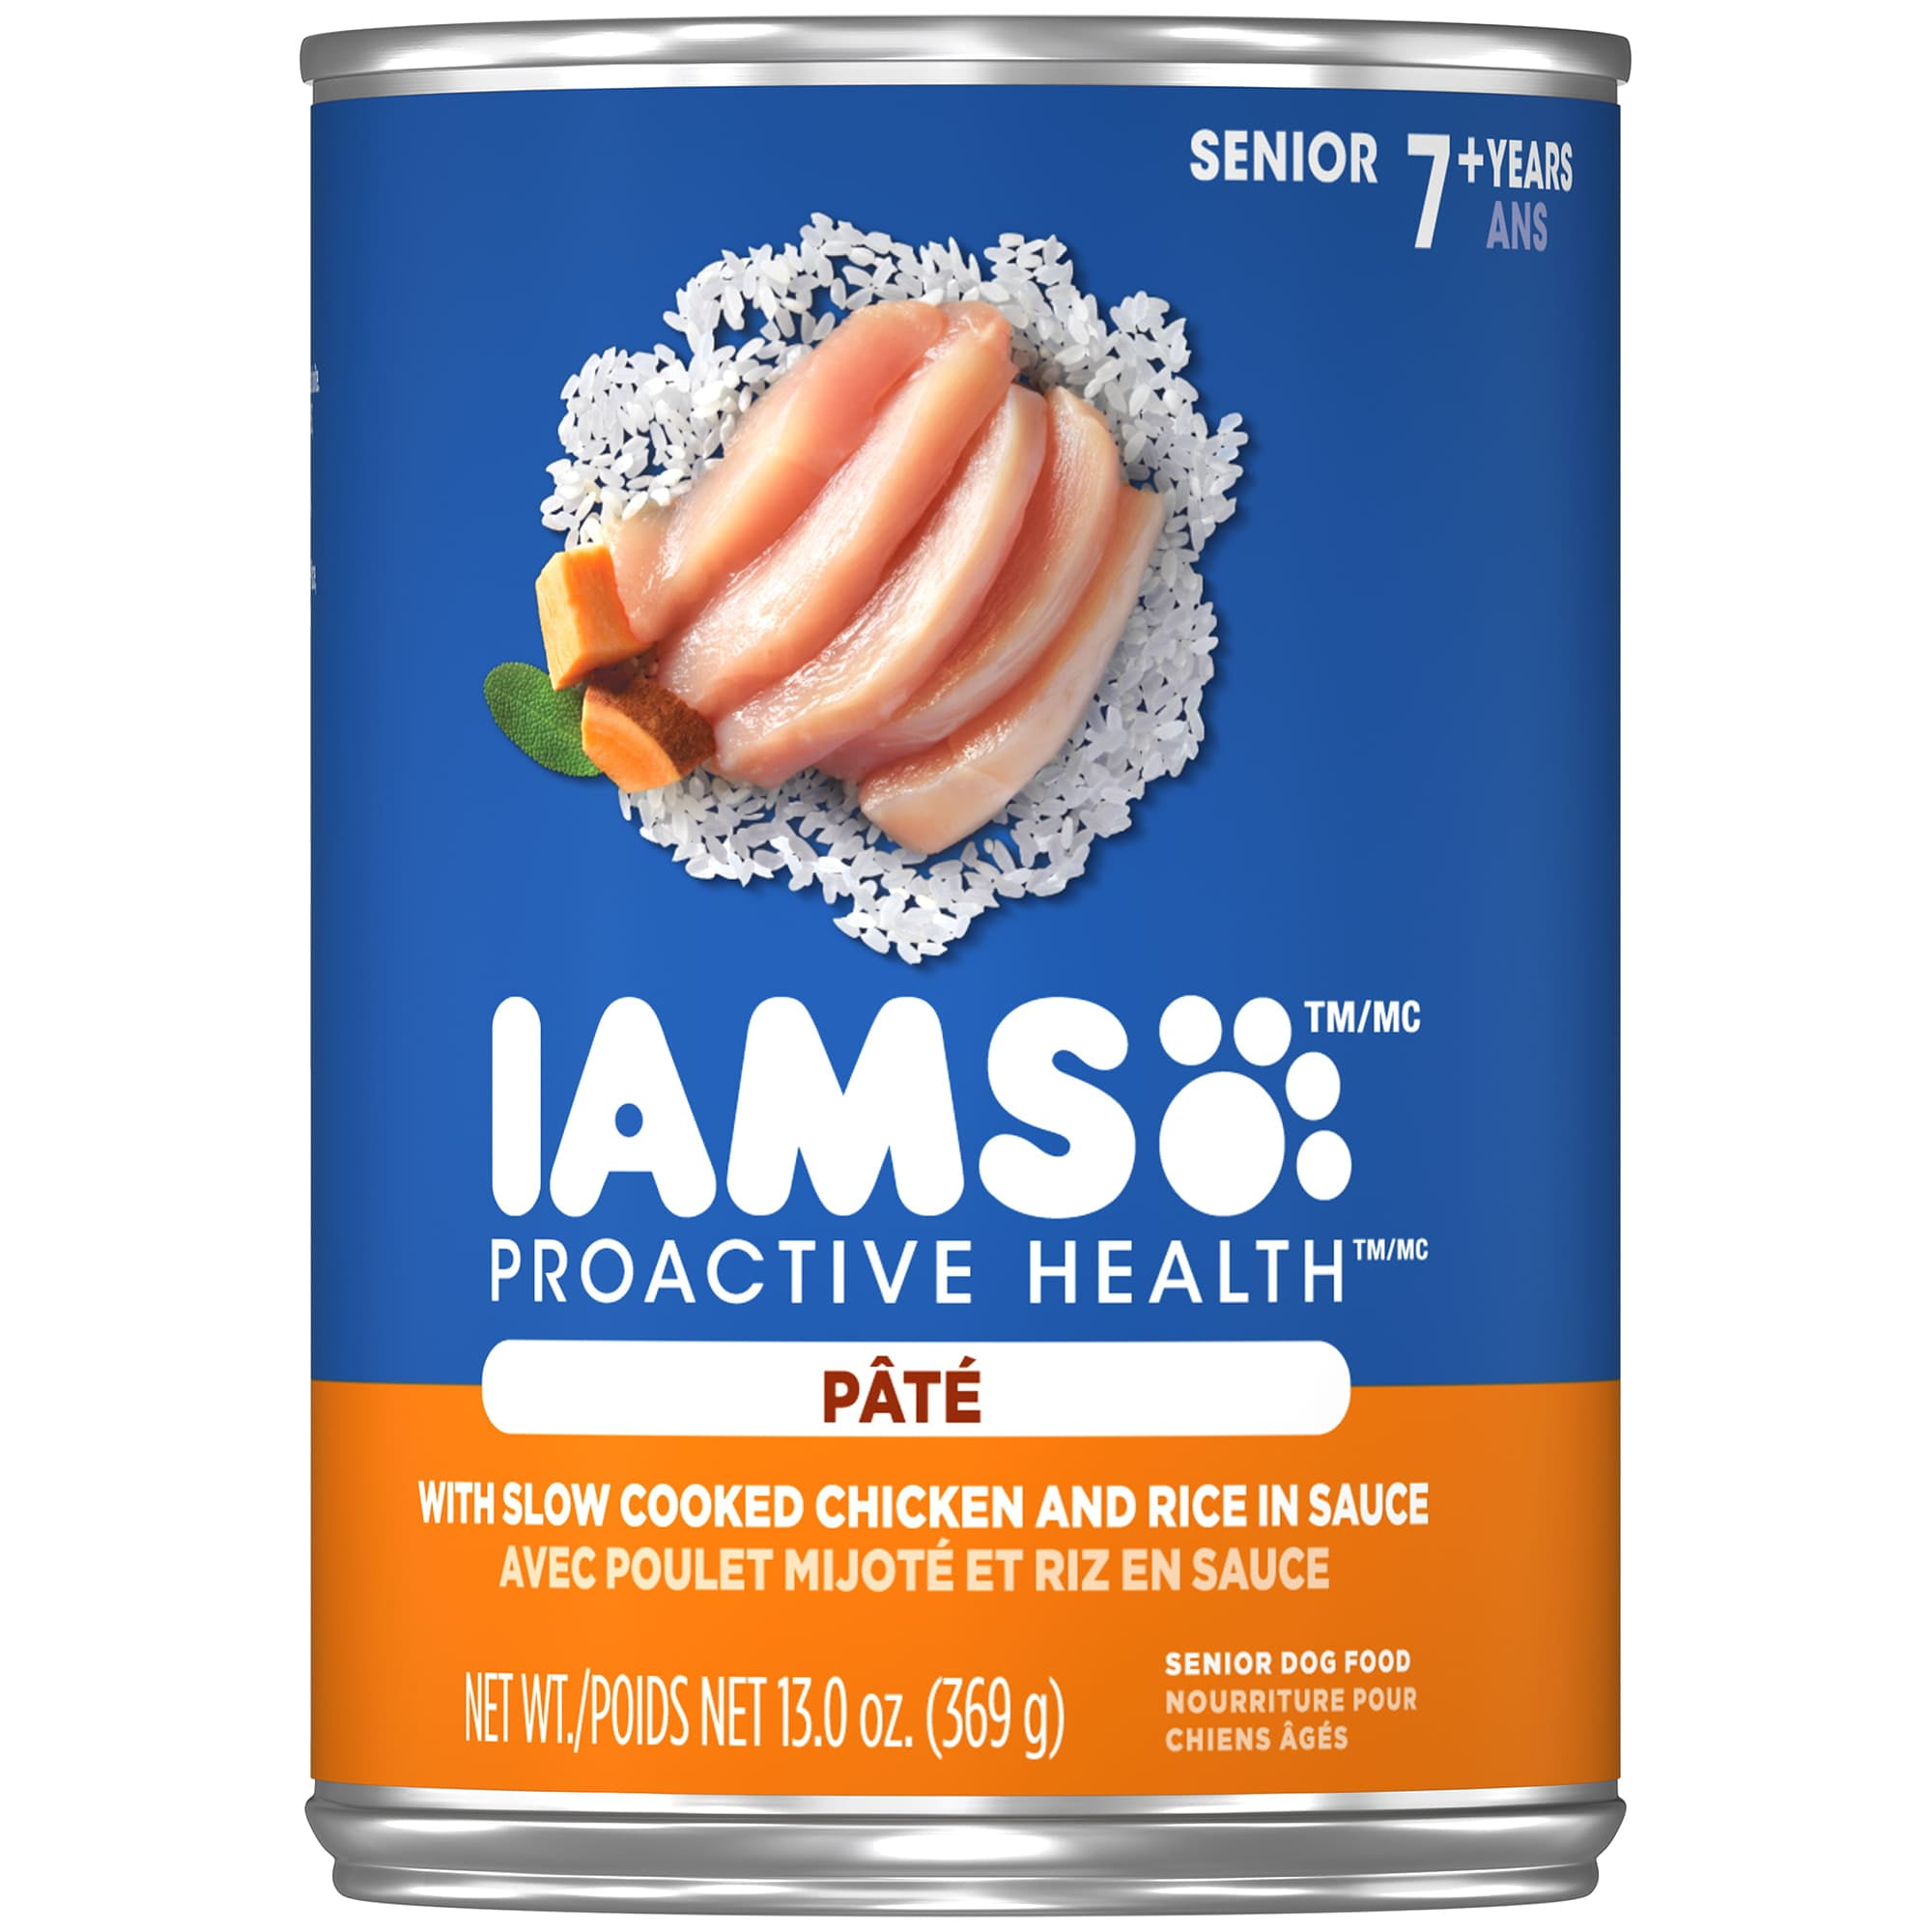 IAMS PROACTIVE HEALTH Senior Soft Wet Dog Food Pat with Slow Cooked Chicken & Rice, 13 oz. Cans